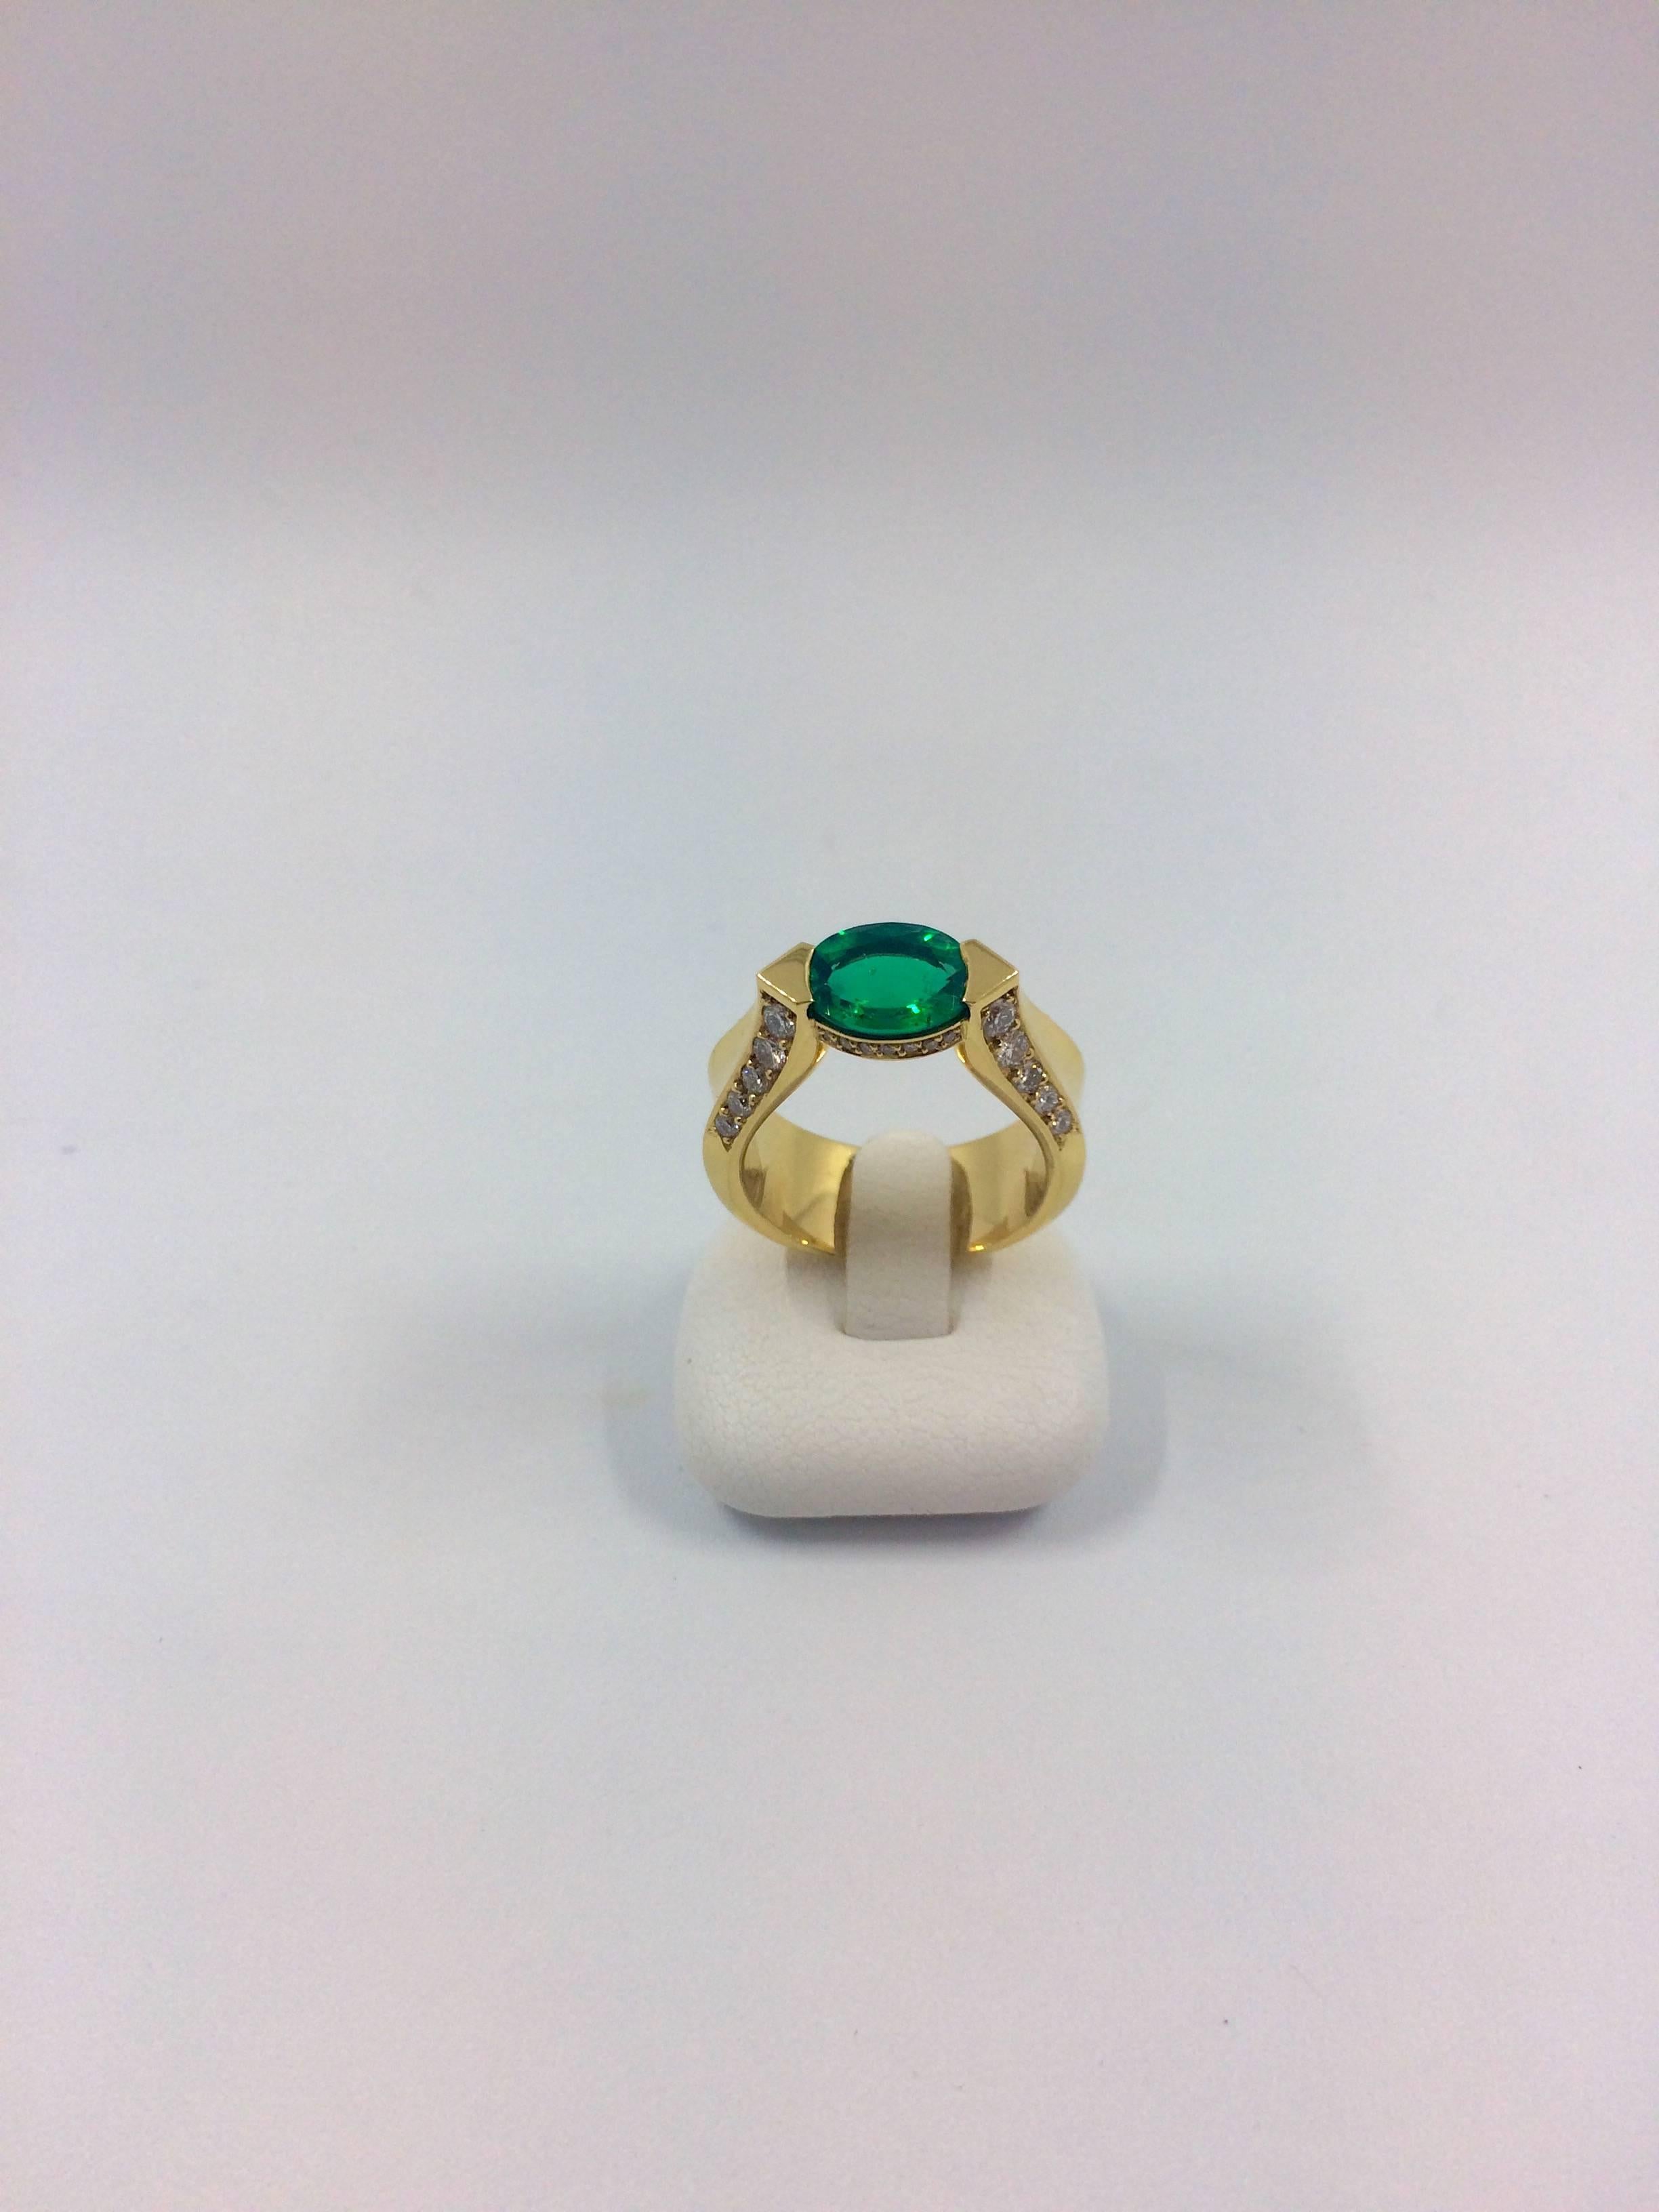 An exceptional yellow gold ring set in the middle with an emerald surrounded by 10 brilliant cut diamonds on each side.
Below the emerald 10 brilliant cut diamonds are setted around the basket.
- Emerald weight: 1.62 carat
- Emerald Origin: